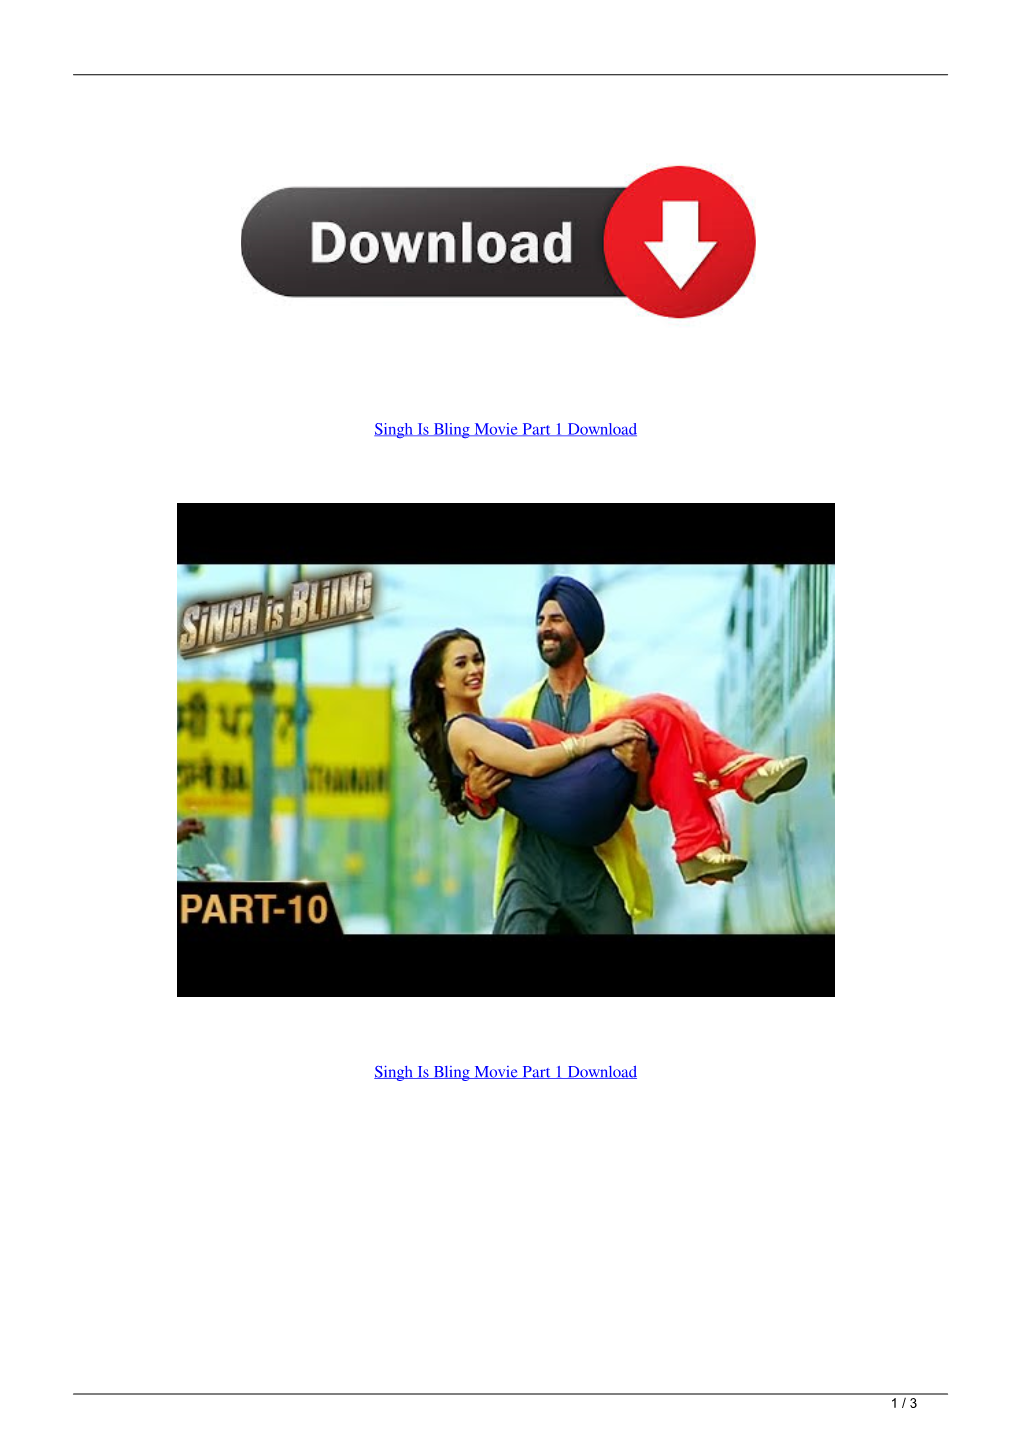 Singh Is Bling Movie Part 1 Download